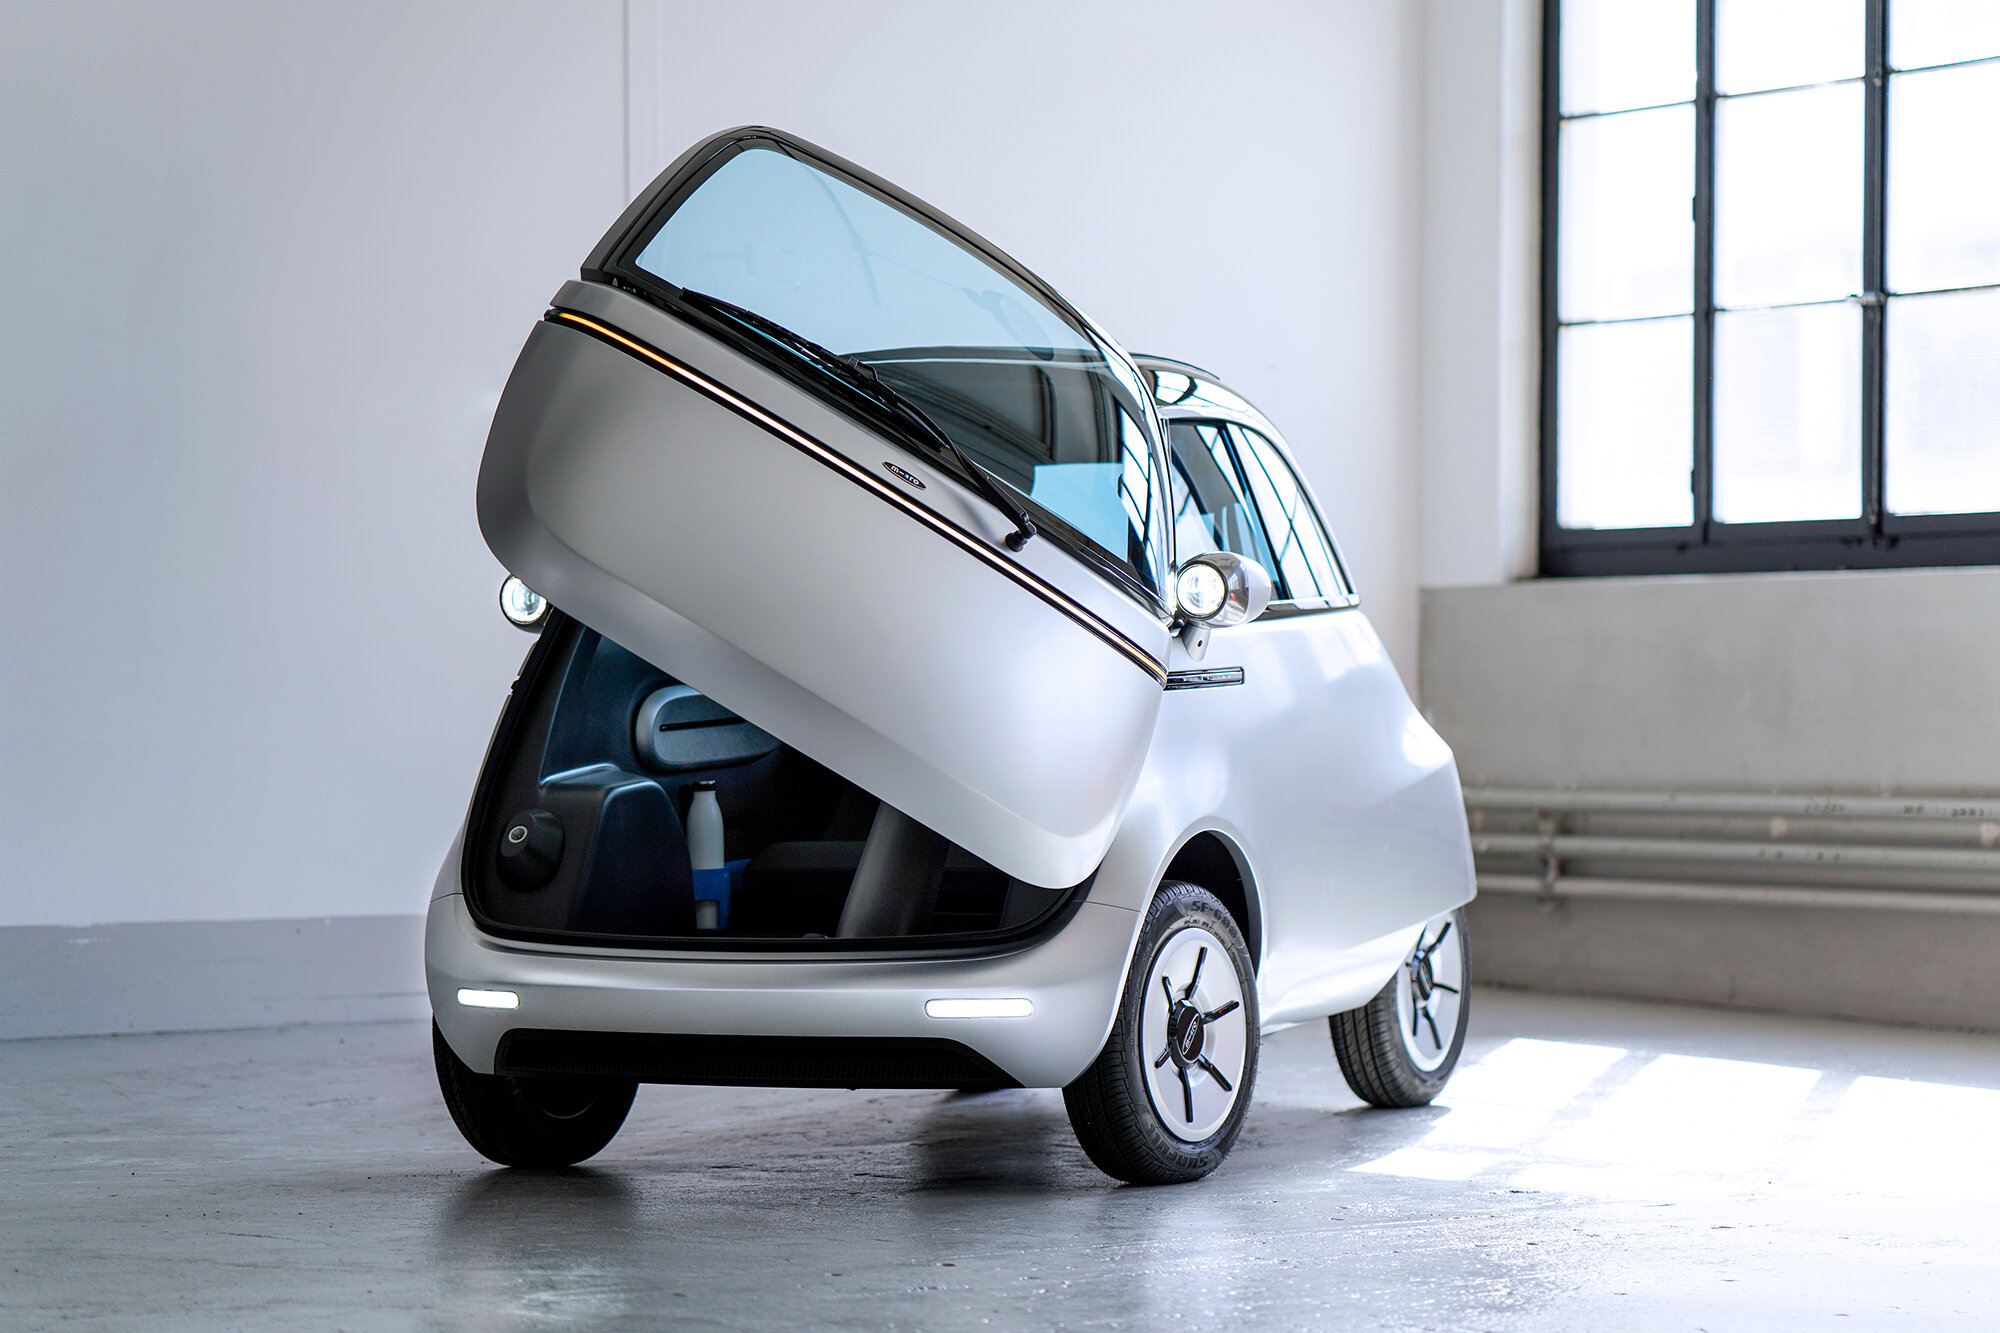 The exterior of new generation of the Microlino